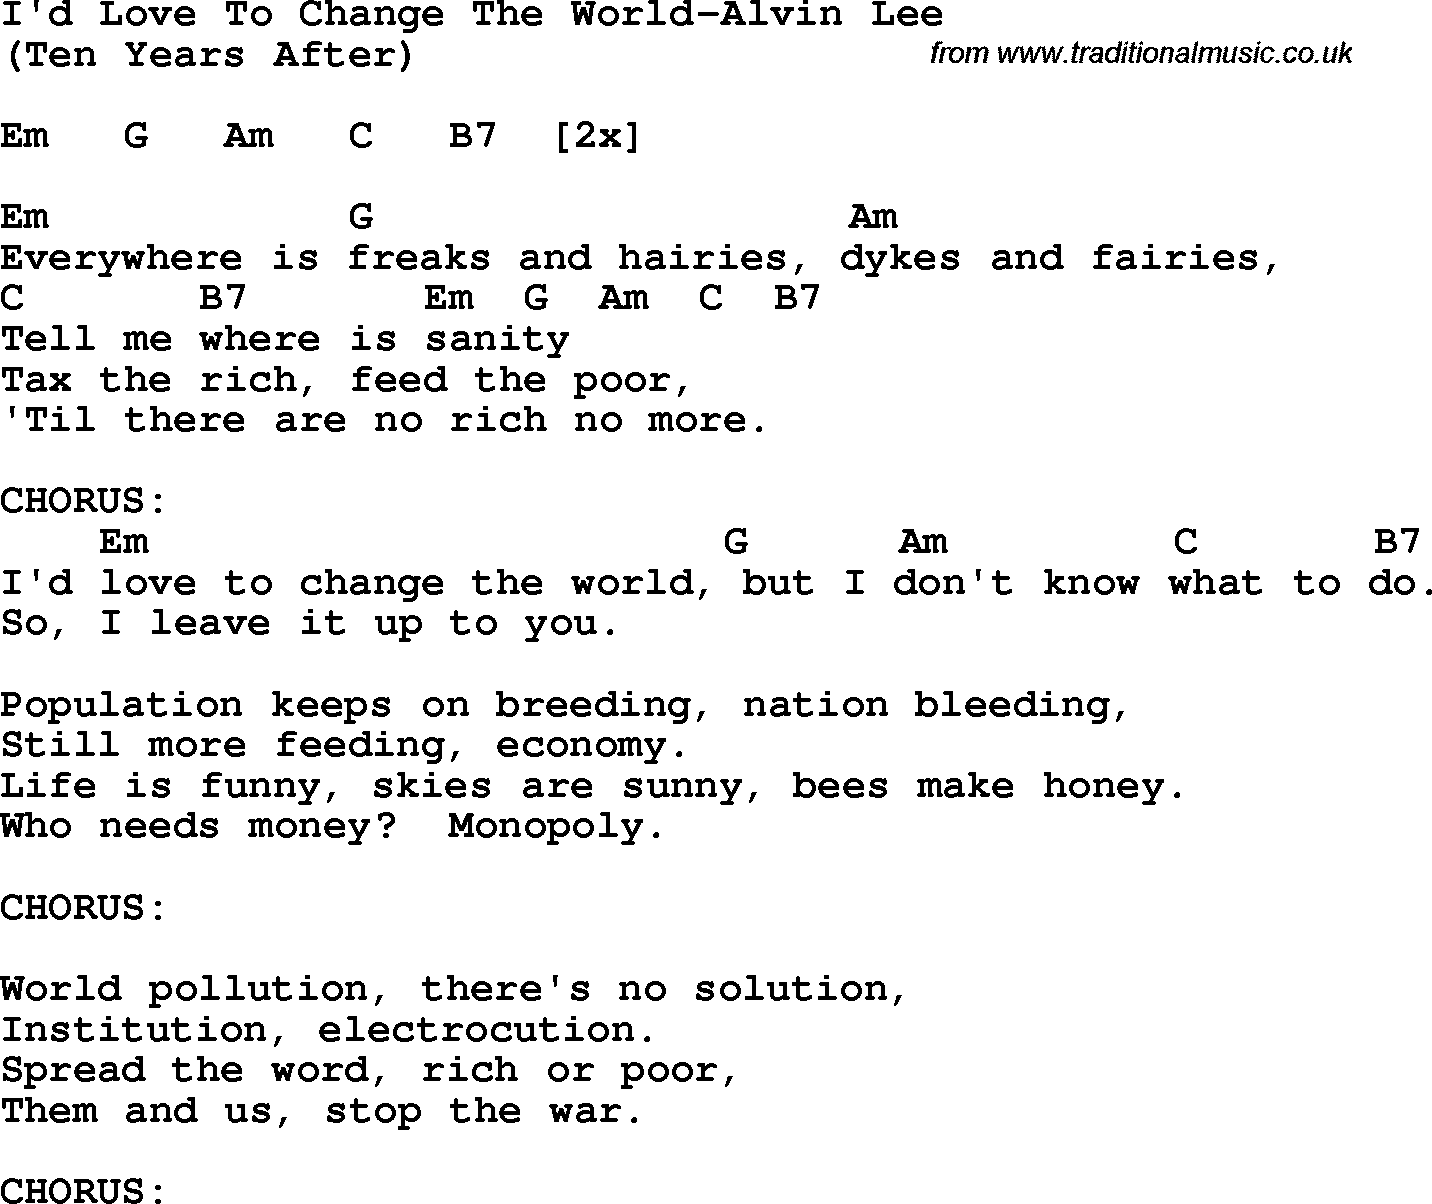 Protest Song I'd Love To Change The World-Alvin Lee lyrics and chords